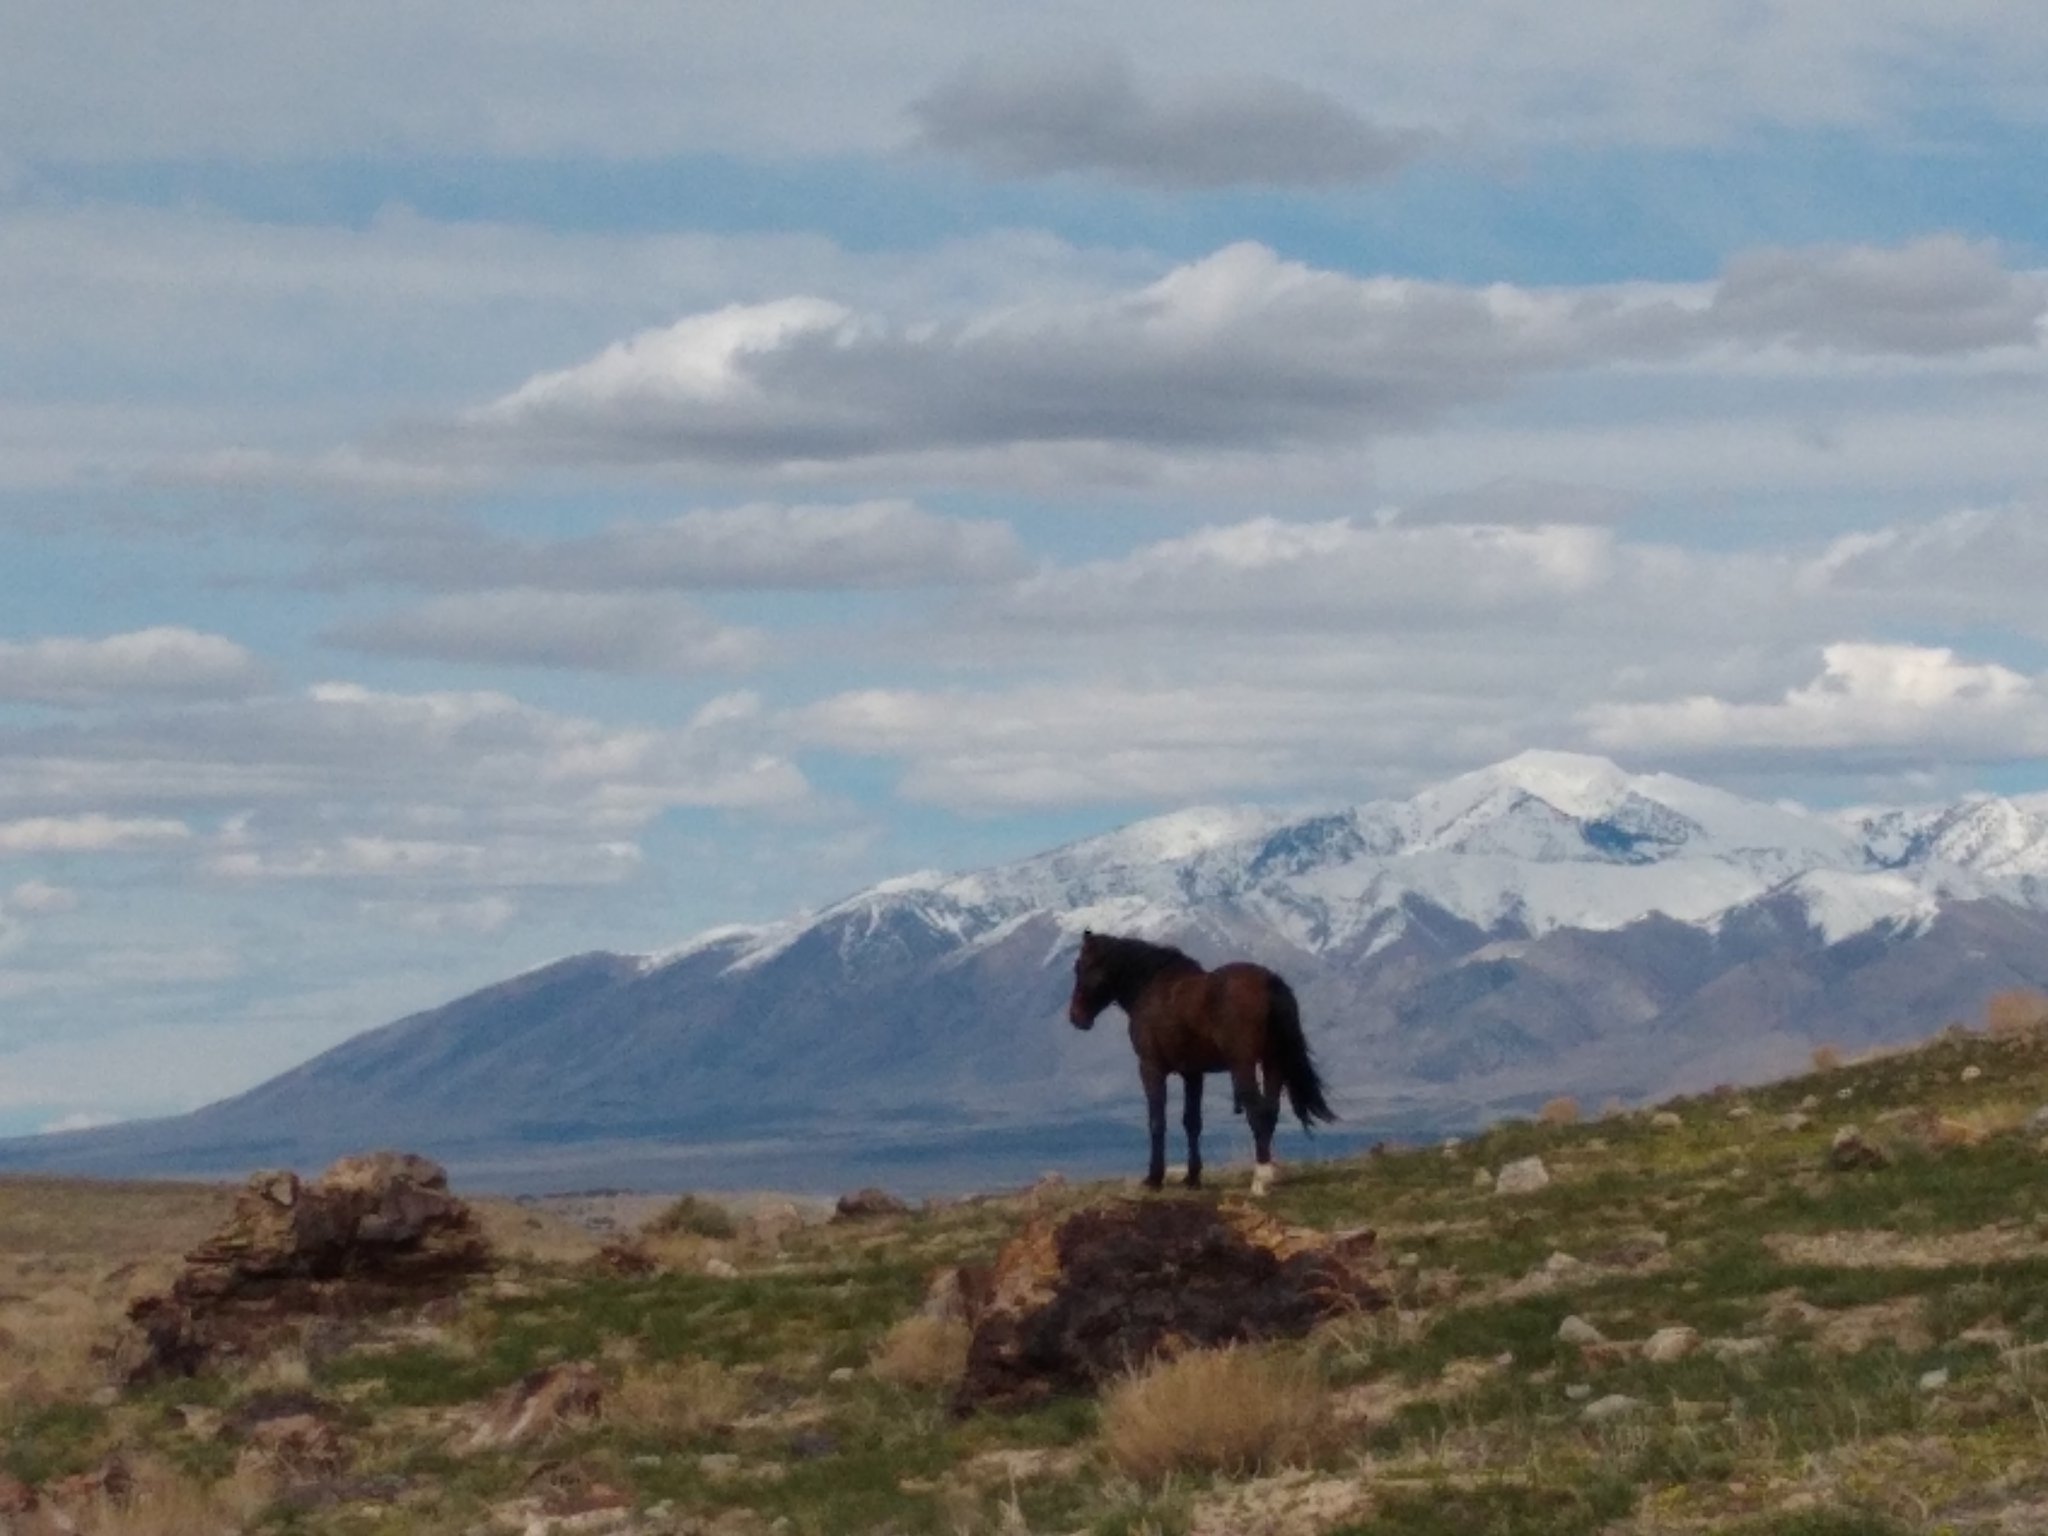 For more than 100 years, the wild horses of the Onaqui have called these rangelands their home. Join us to protect this iconic herd now.